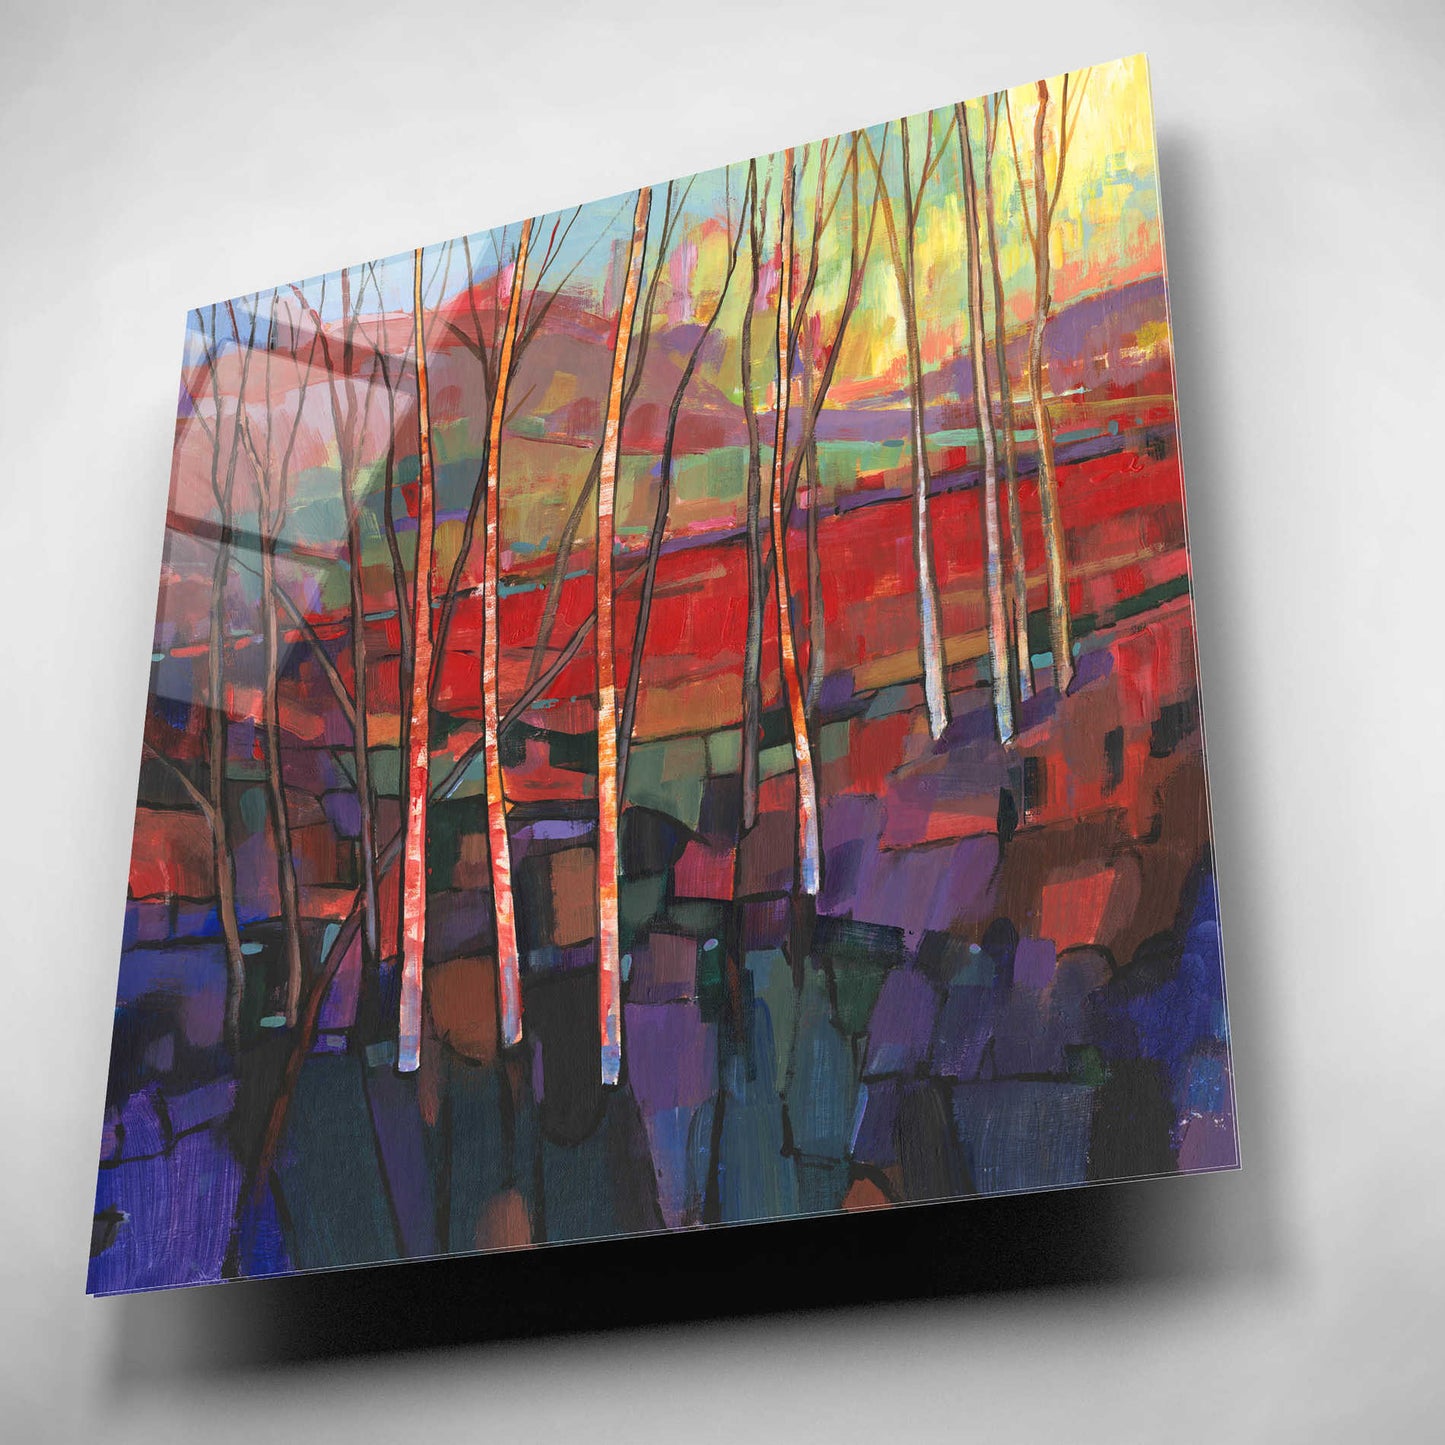 Epic Art 'Patchwork Trees II' by Tim O'Toole, Acrylic Glass Wall Art,12x12